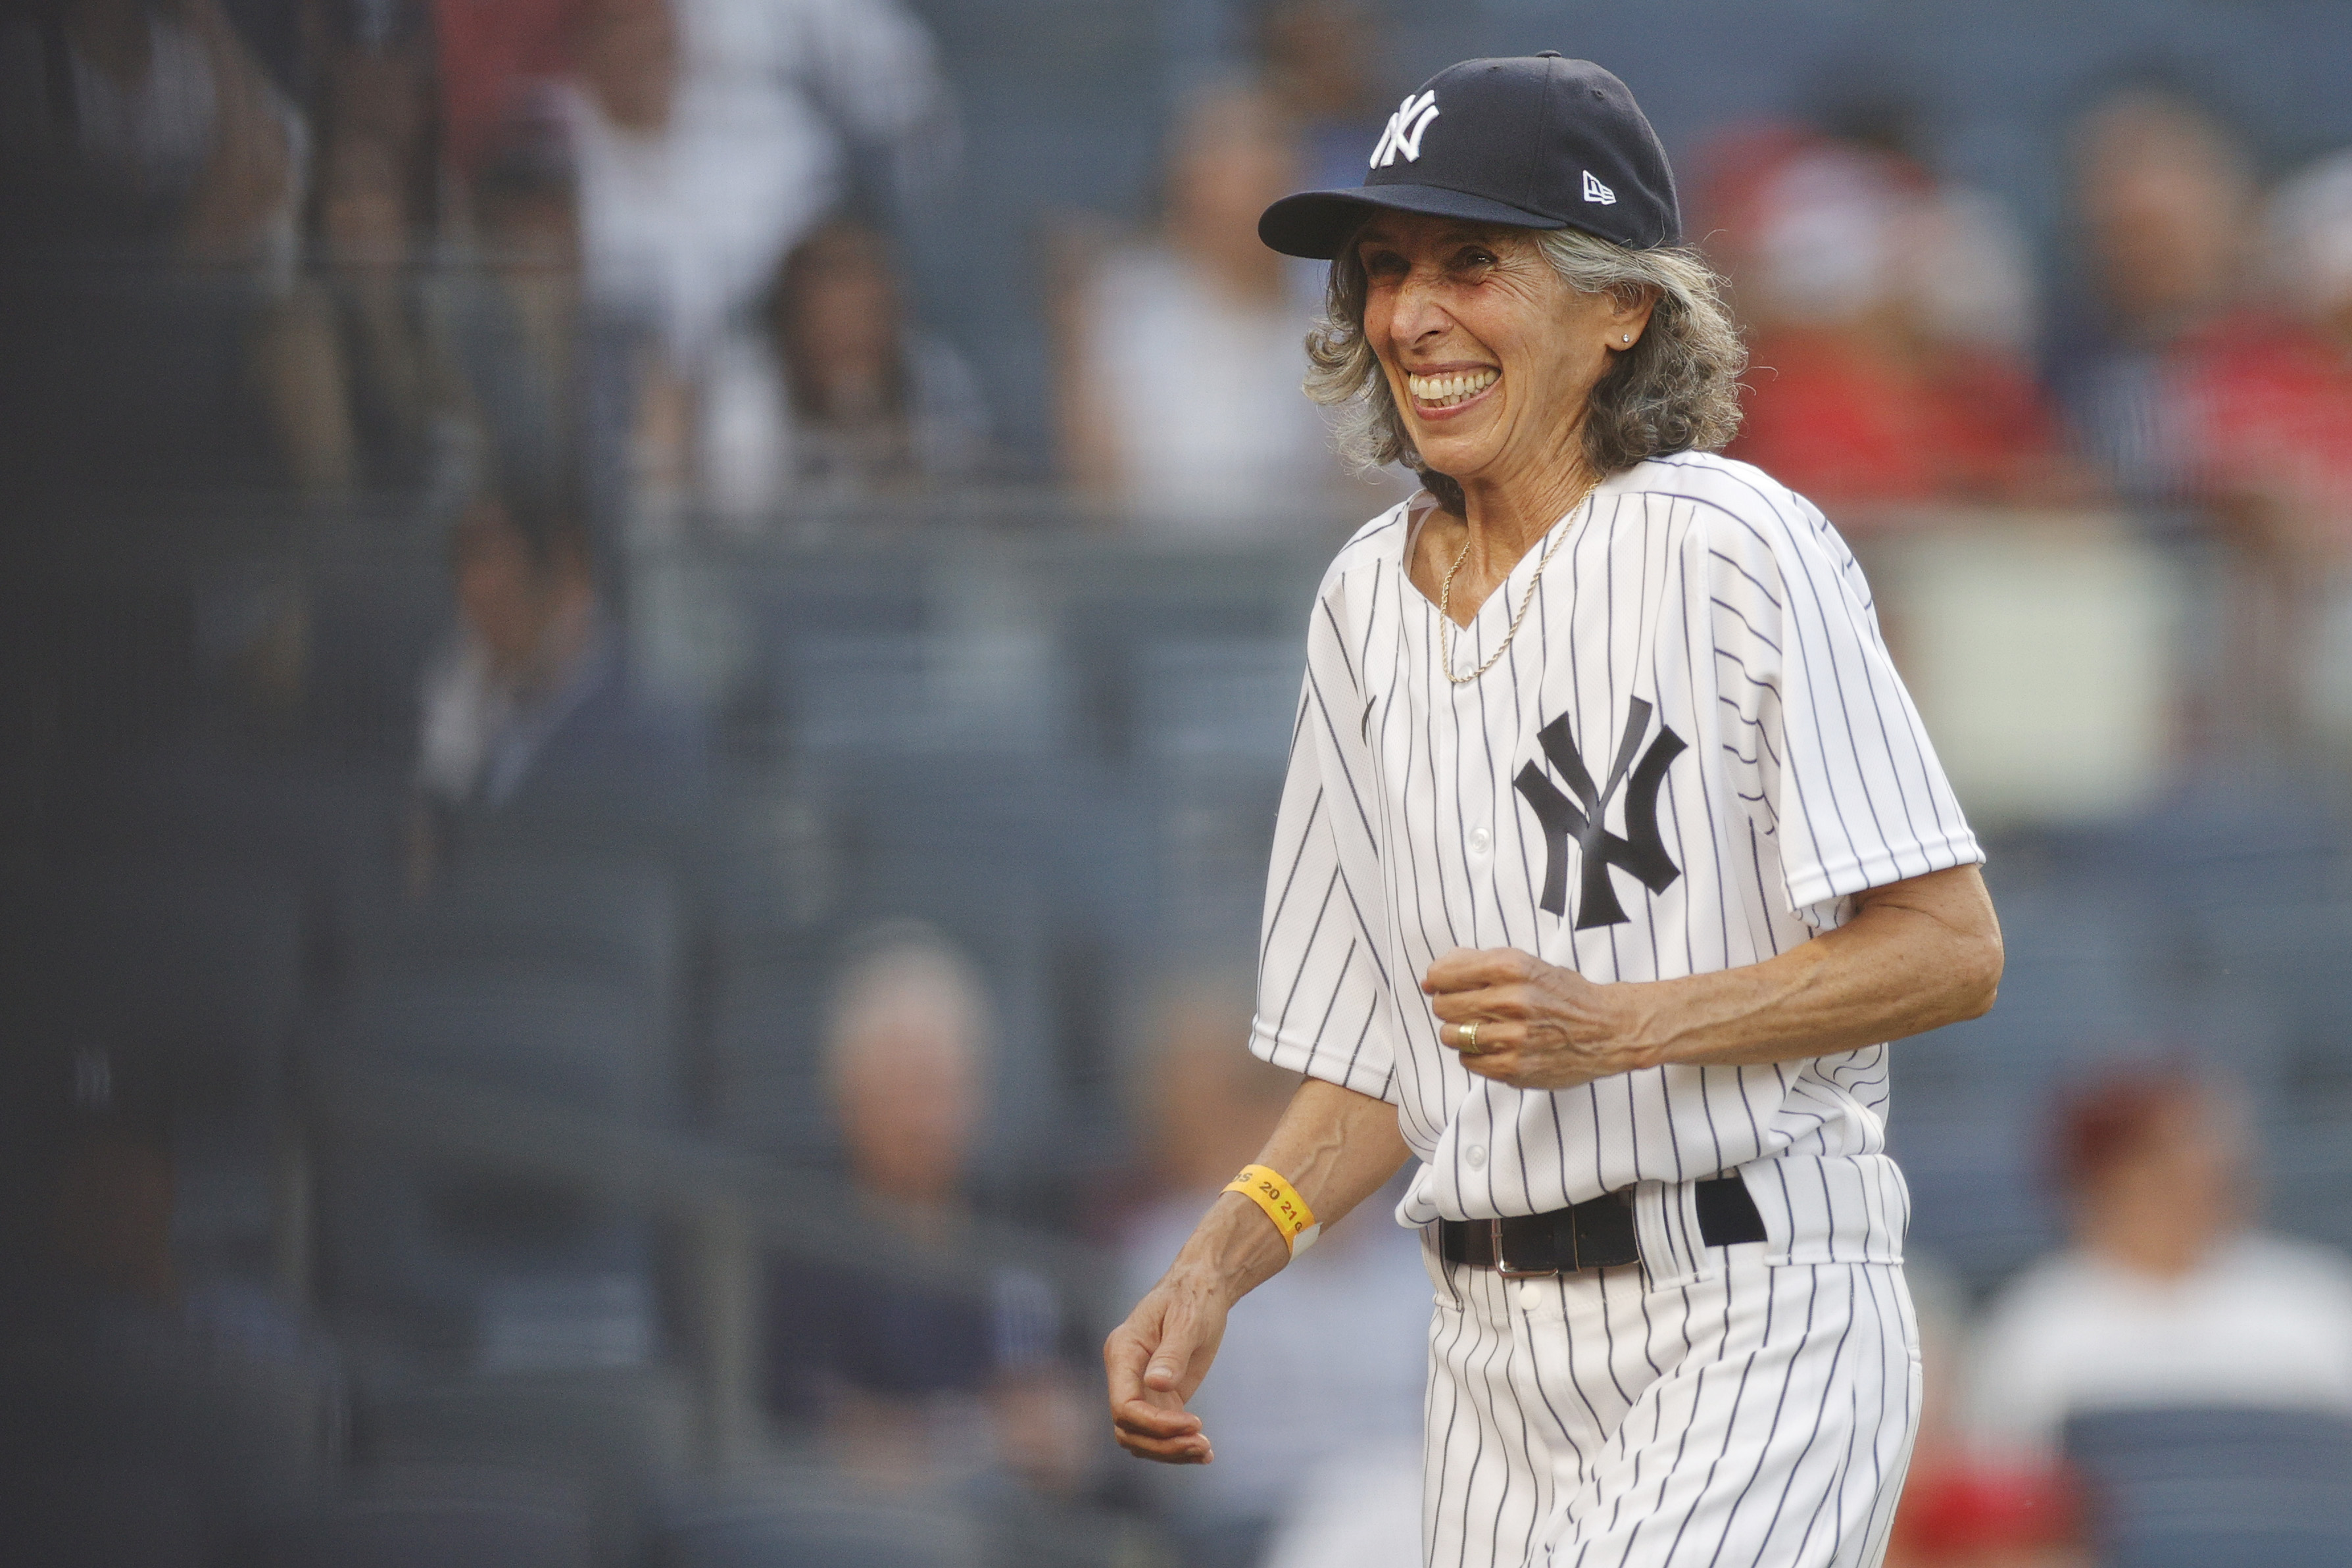 Video: Gwen Goldman Reacts to Fulfilling 60-Year-Old Dream of Being Yankees Bat ..